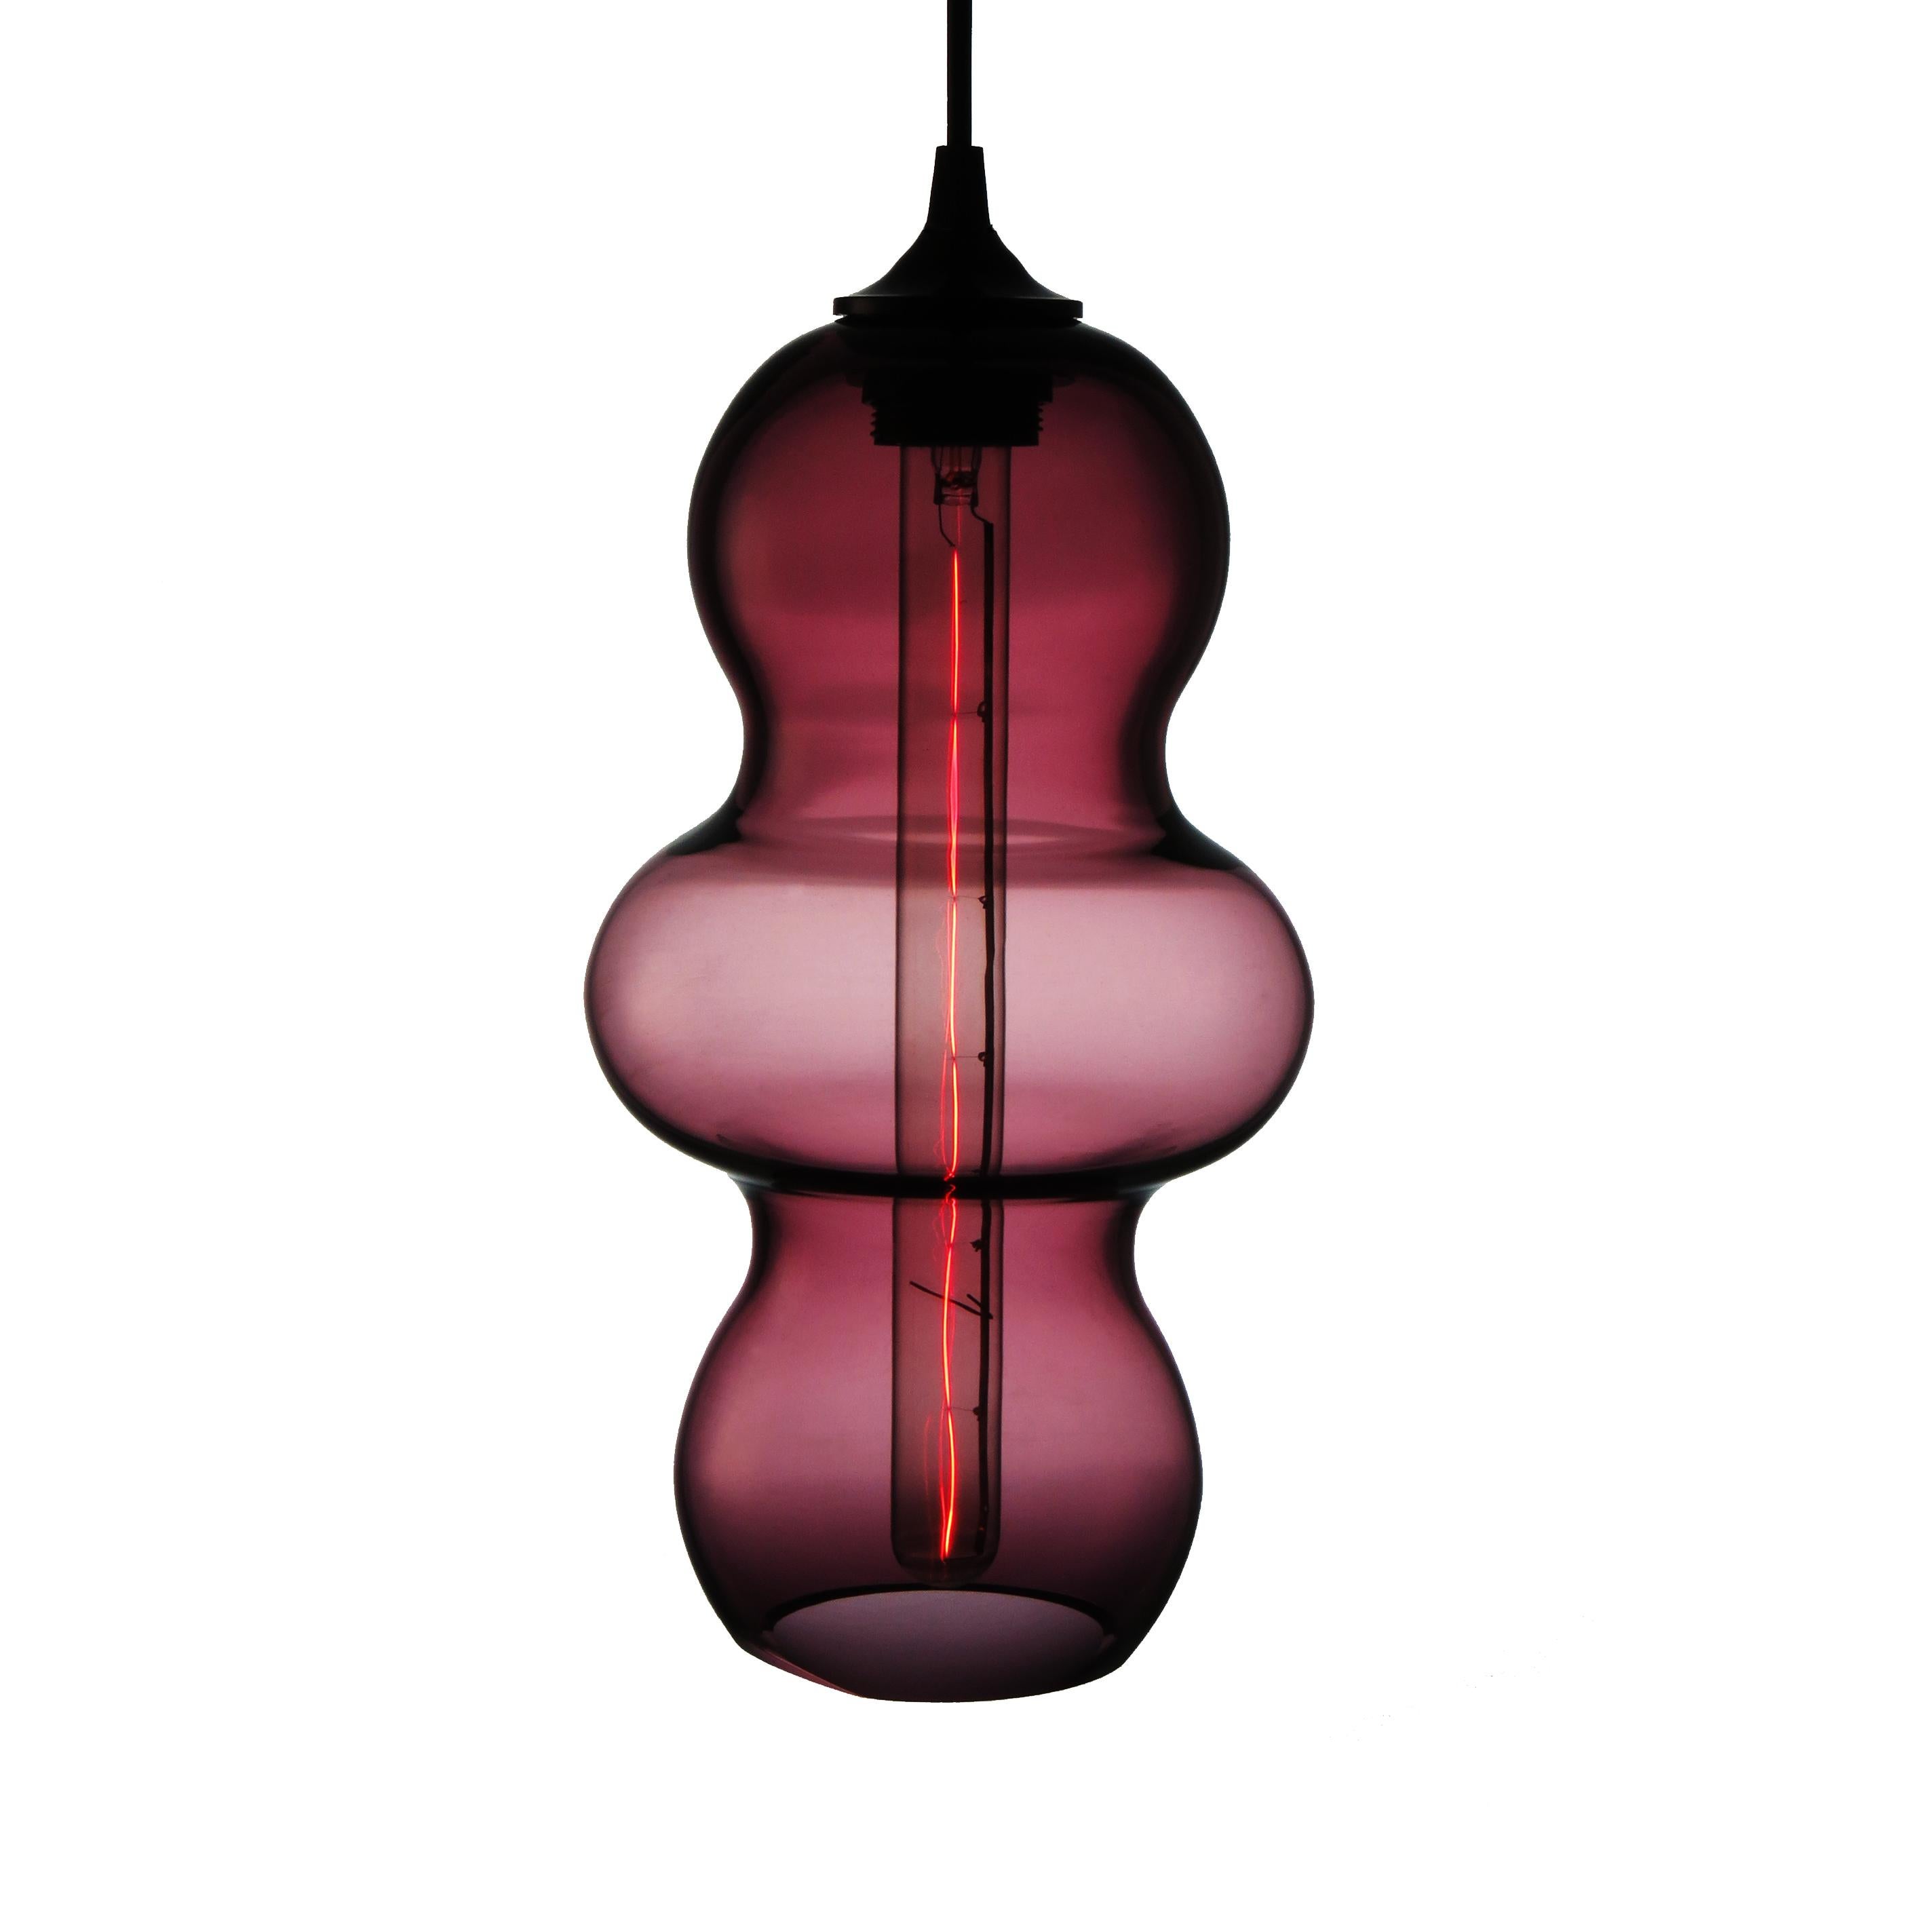 Crystal Clear Contemporary Organic Architectural Hand Blown Pendant Lamp For Sale 2